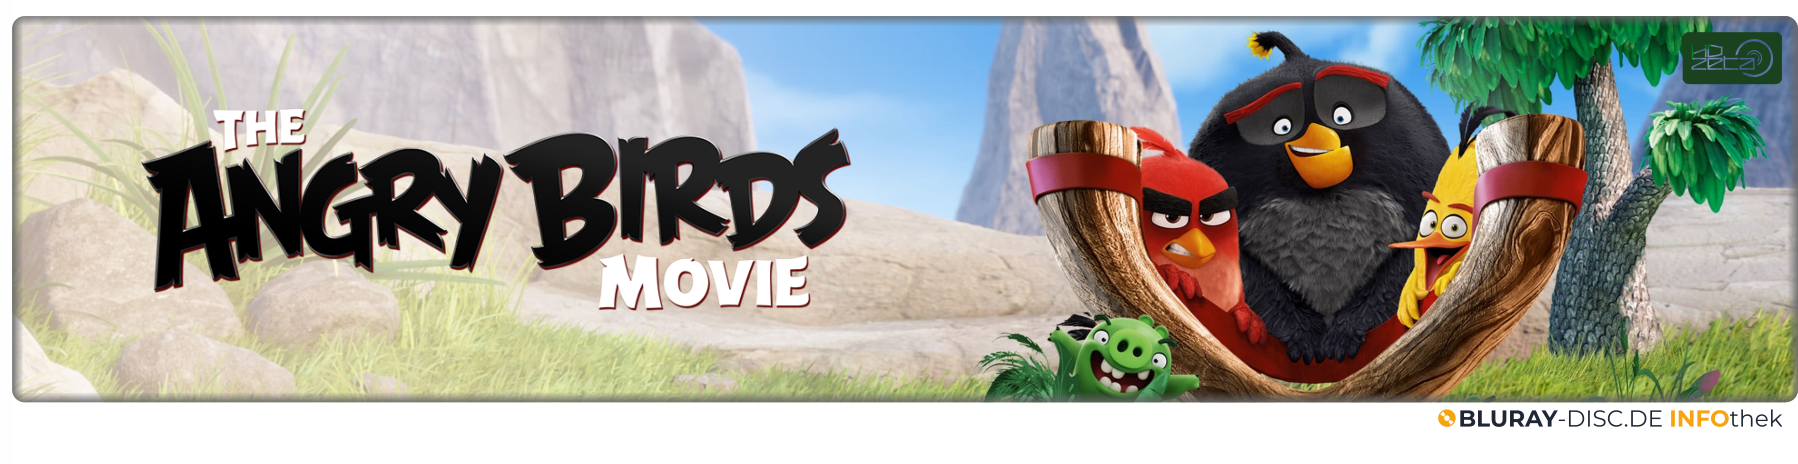 The_Angry_Birds_Movie.png